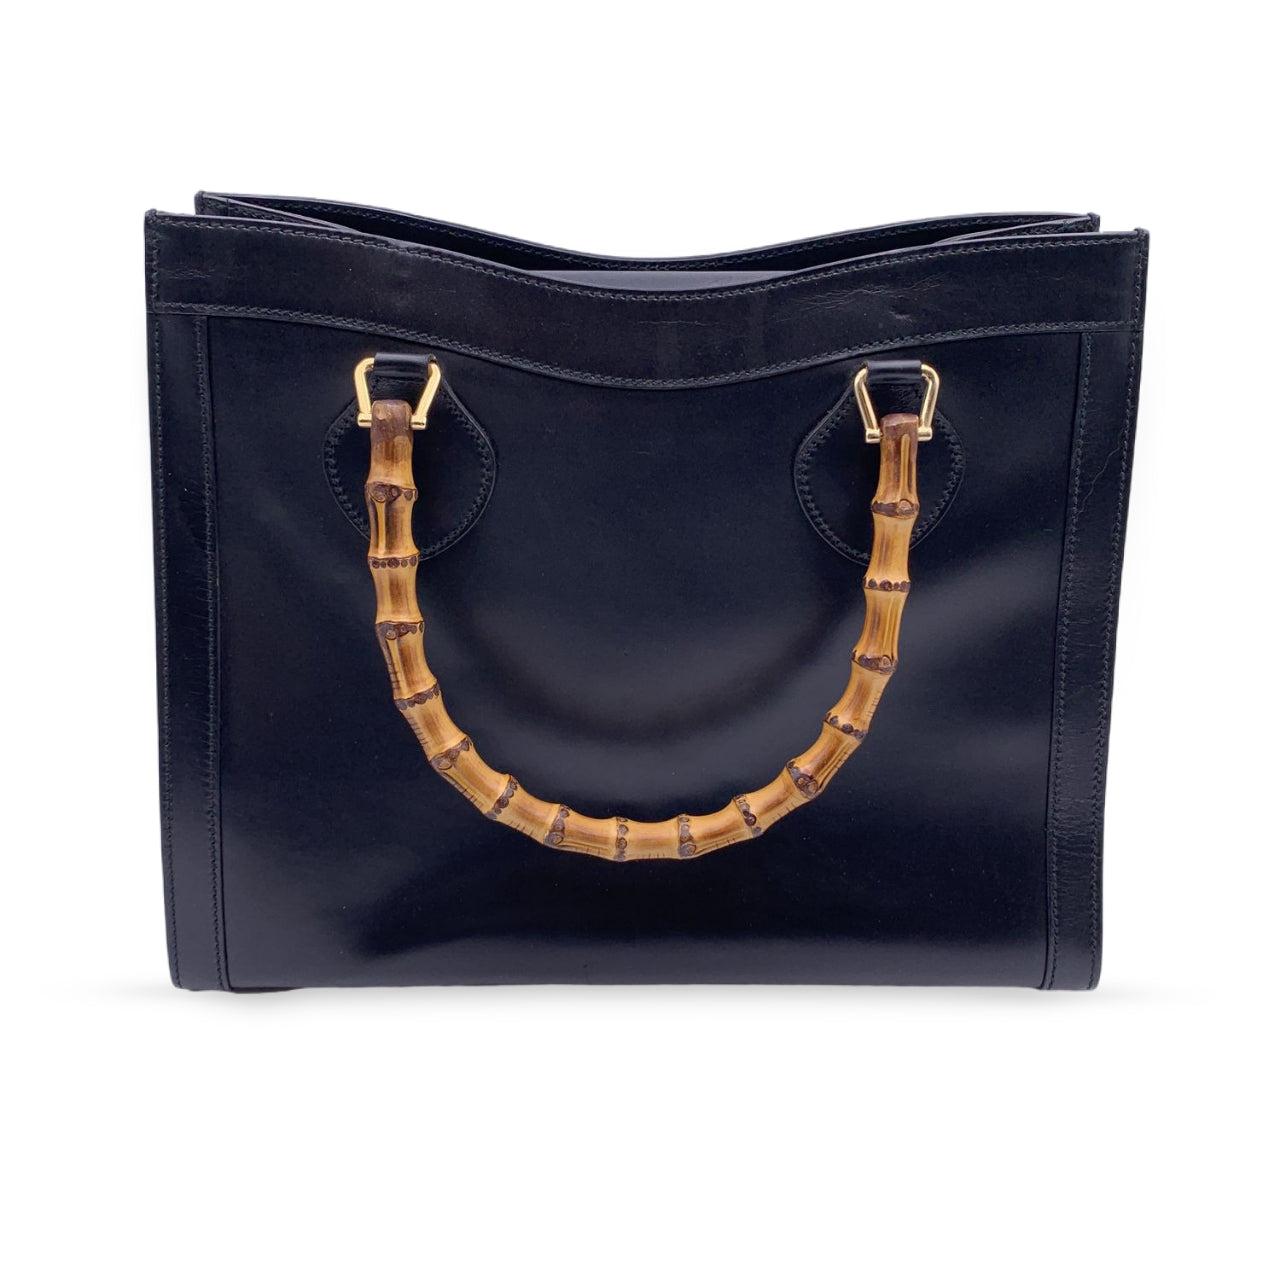 Beautiful Gucci Bamboo tote bag in black leather. Double distinctive Bamboo handle. Princess Diana, was snapped carrying a this model on several occasions. Magnetic button closure on top. 5 bottom feet. Gold metal hardware. 1 side zip pocket inside.